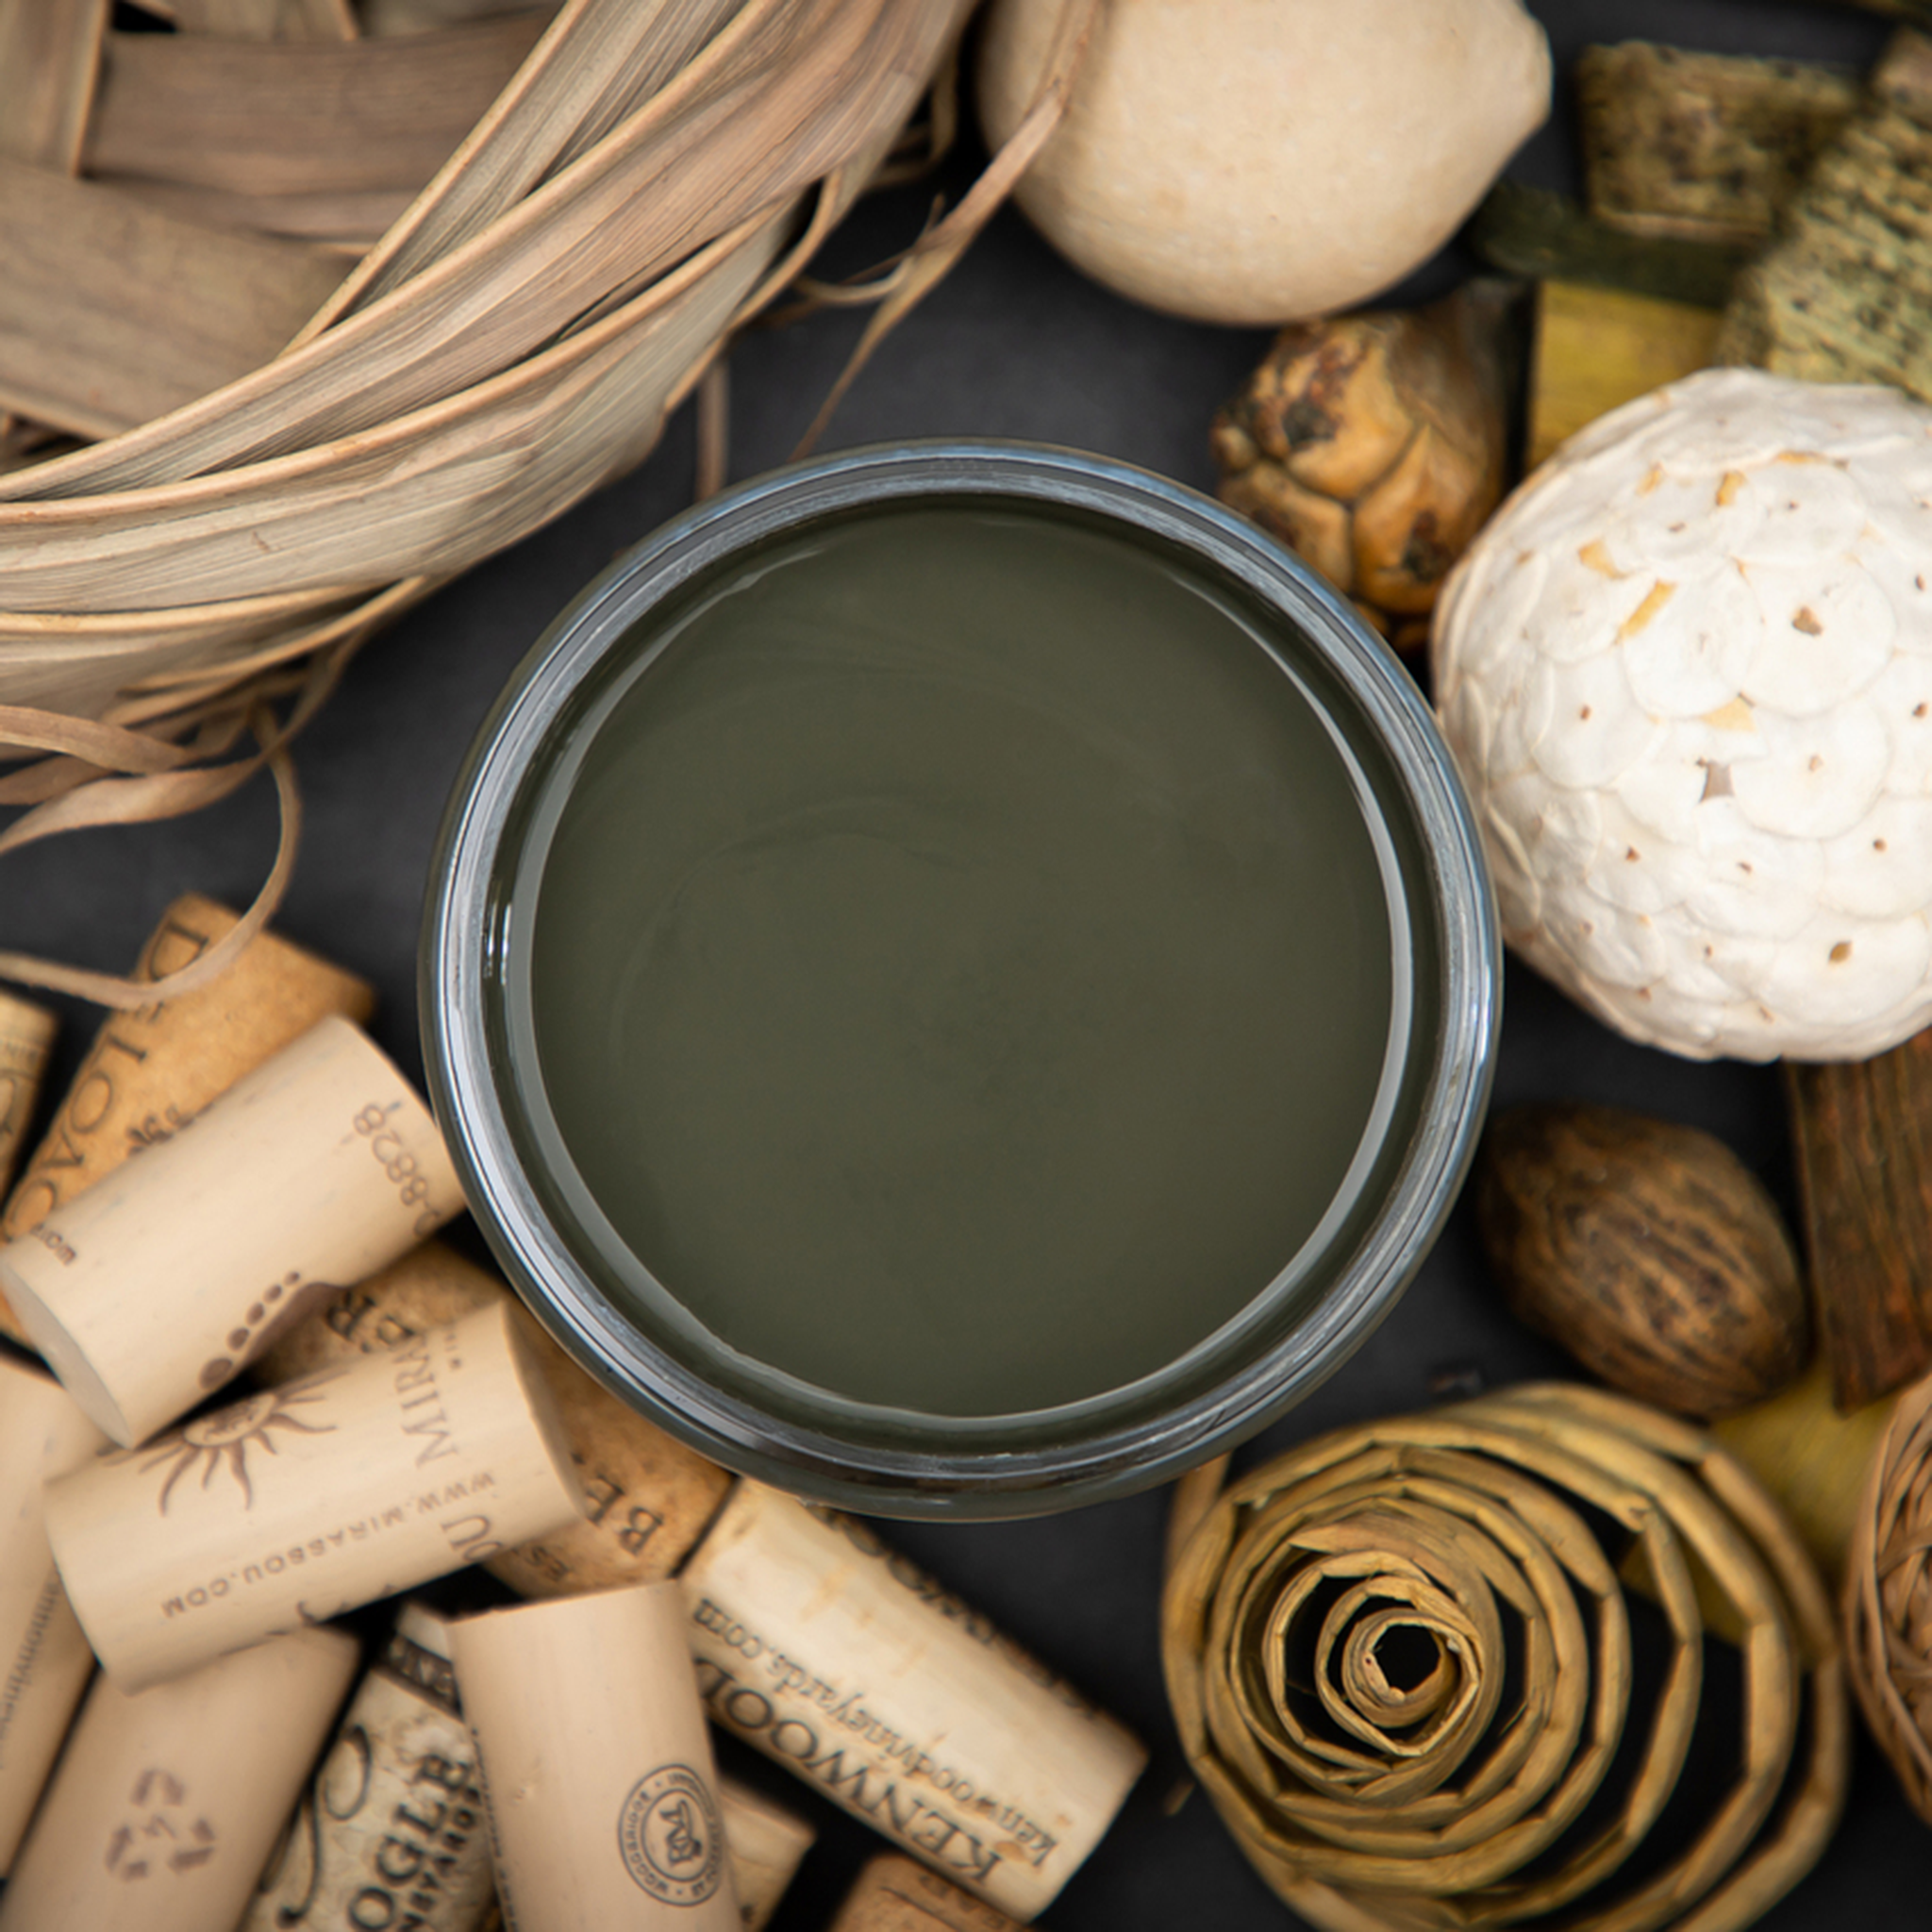 An arial view of an open container of Dixie Belle Paint Company’s Collard Greens Chalk Mineral Paint is surrounded by bottle corks, nuts, and a brown wicker basket.